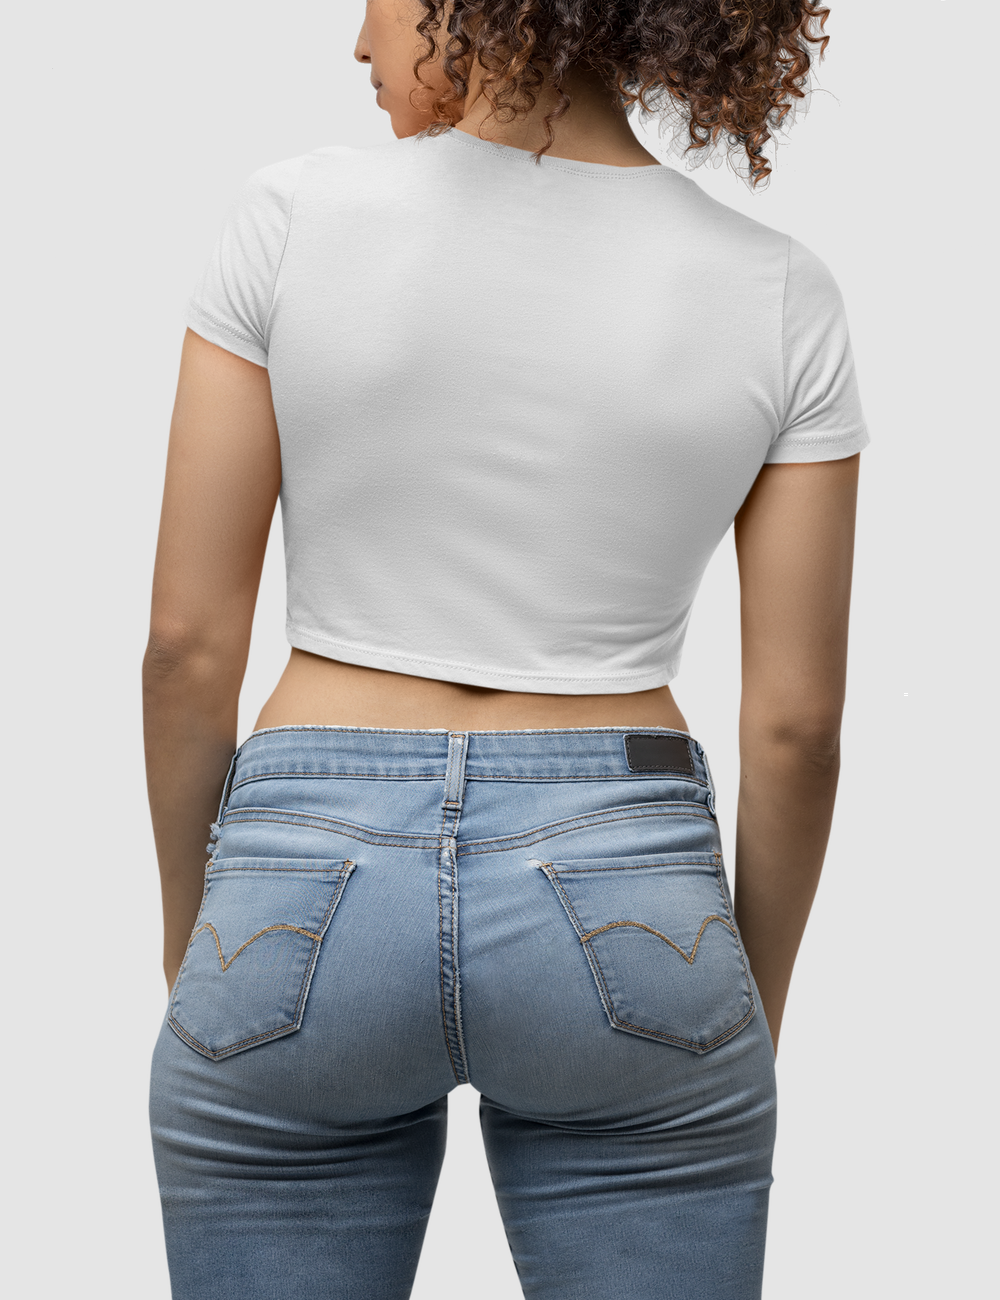 Save The Boobs | Women's Fitted Crop Top T-Shirt OniTakai